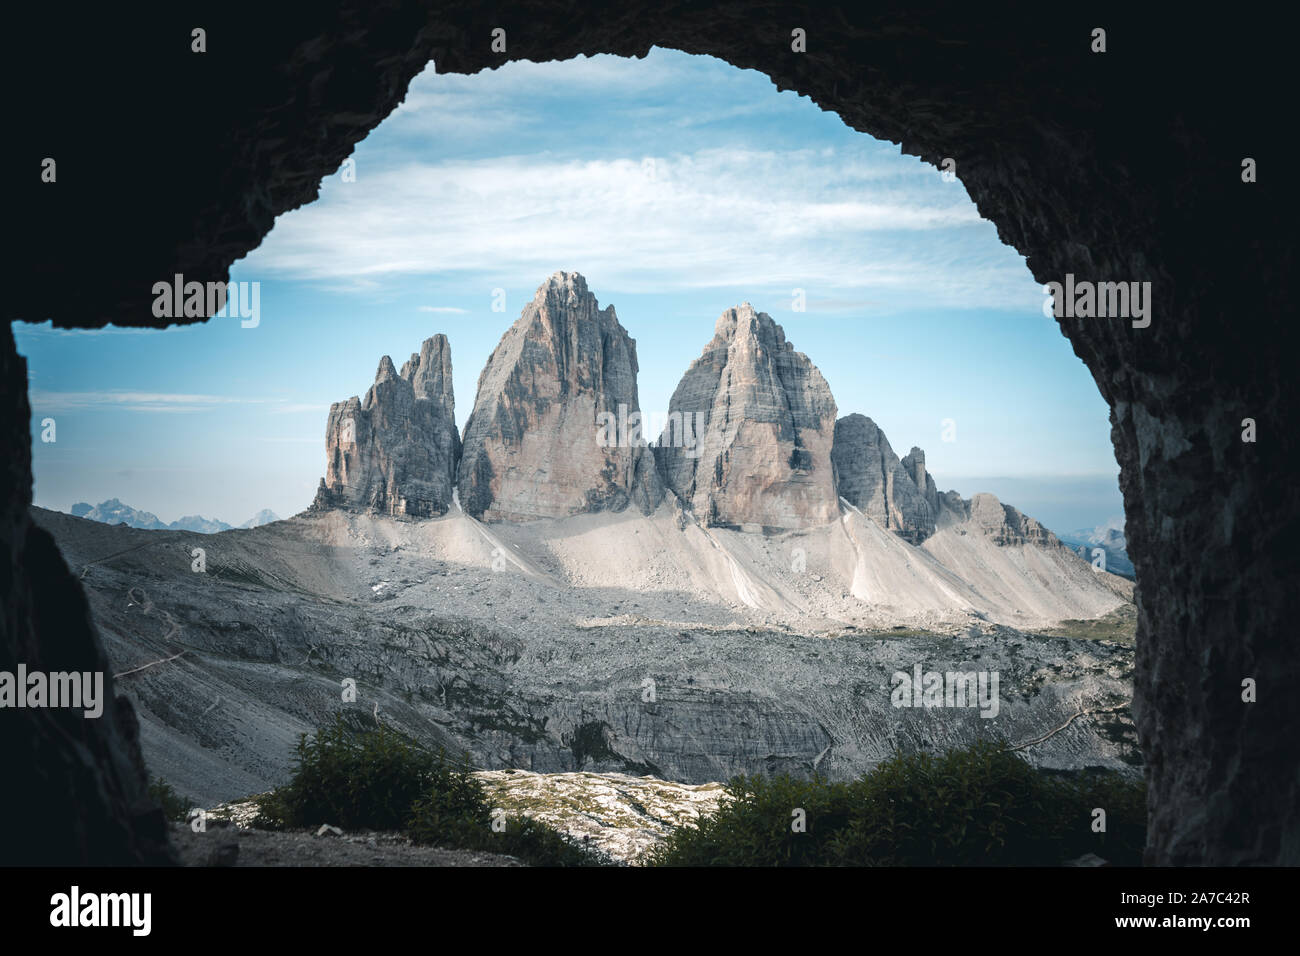 tre cime di (three peaks of) lavaredo peaks as seen from inside a cave where soldiers use to sleep during the second or first world war Stock Photo